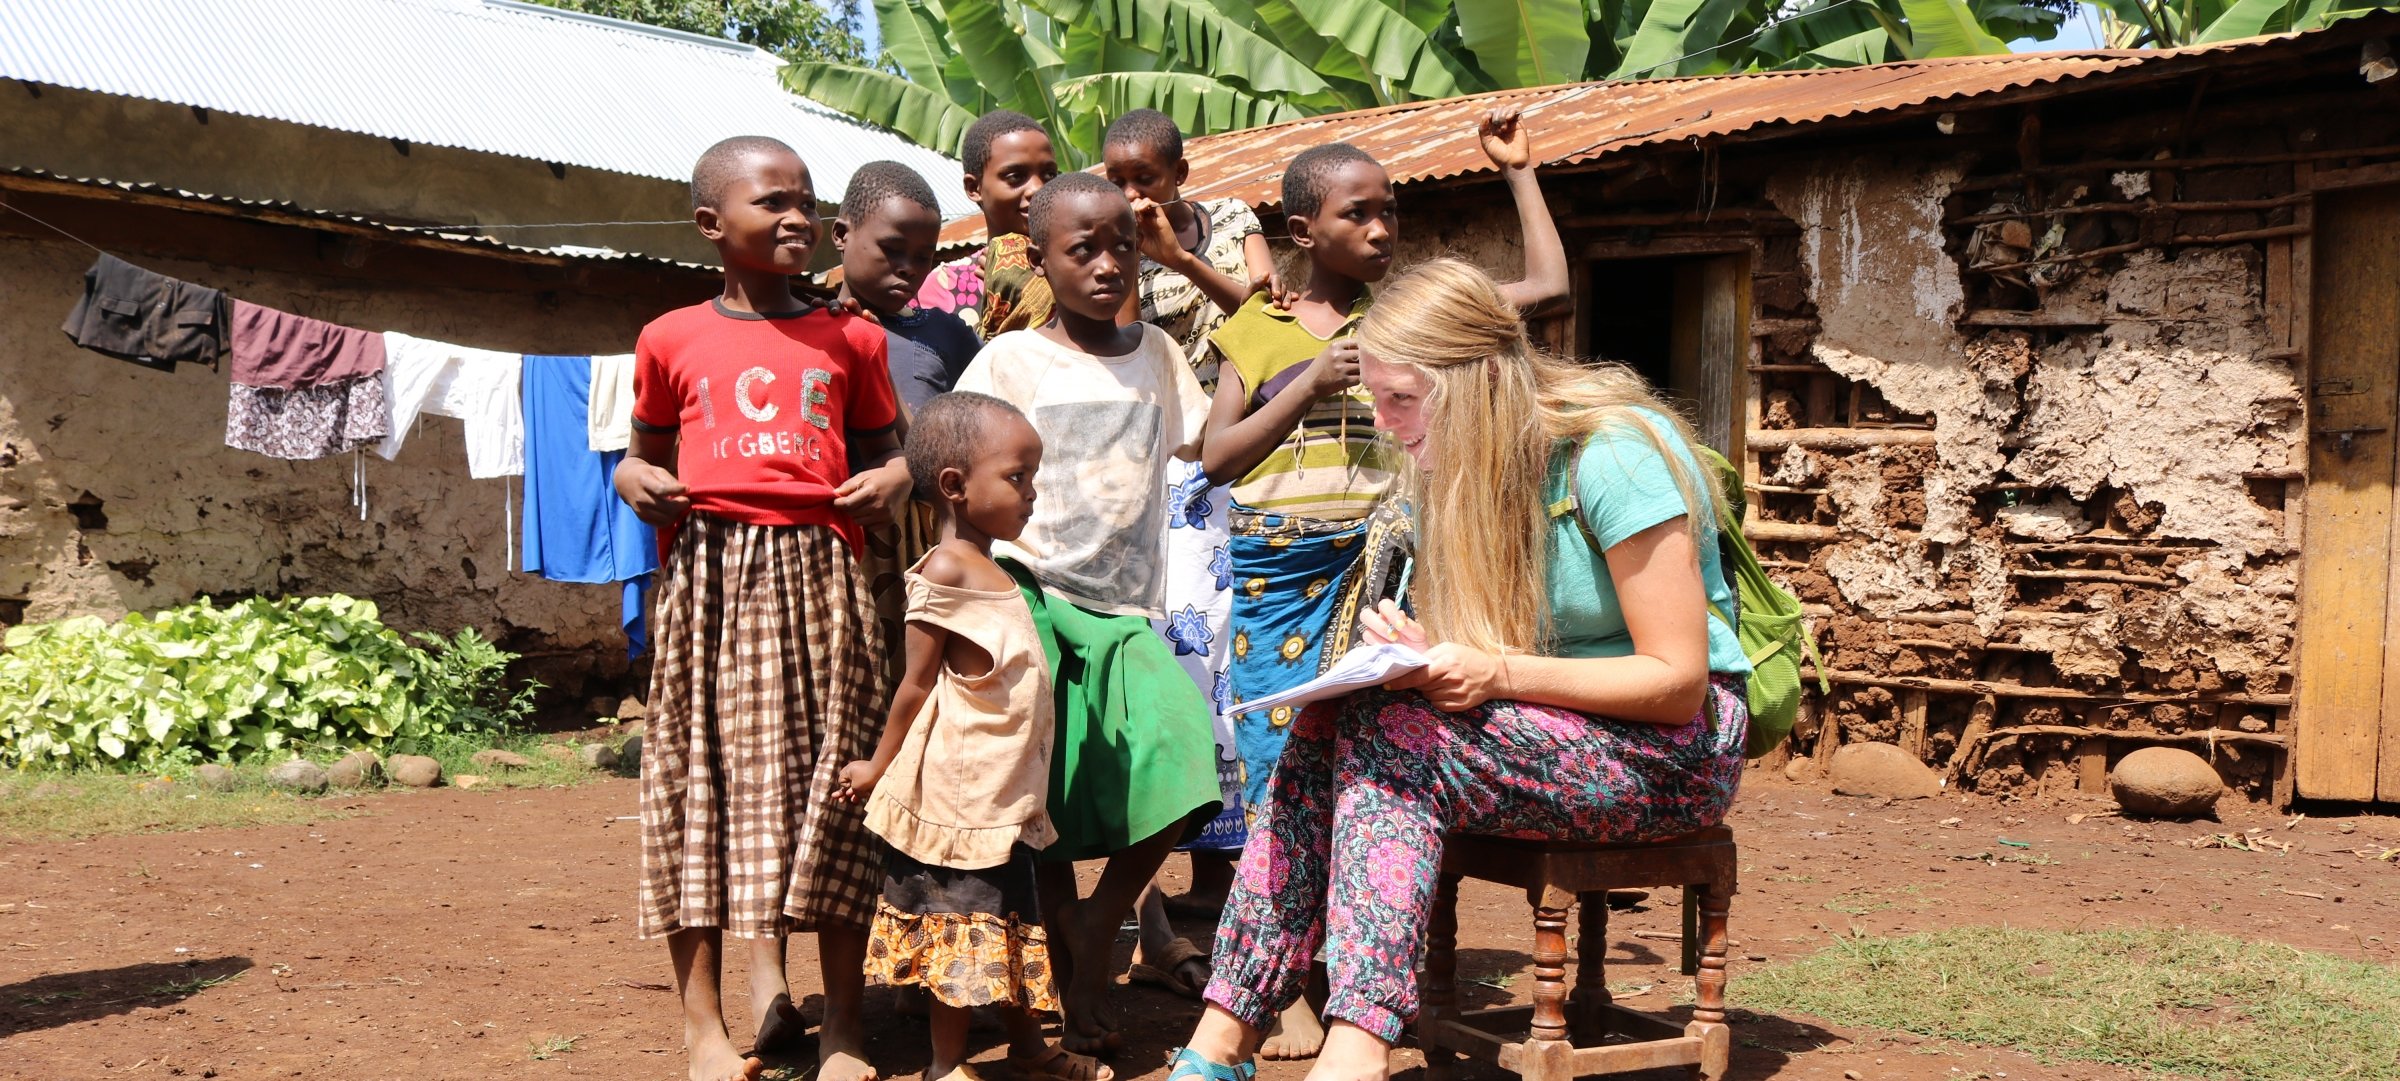 A Pavlis Honors student reading to kids on a Global Leadership trip.